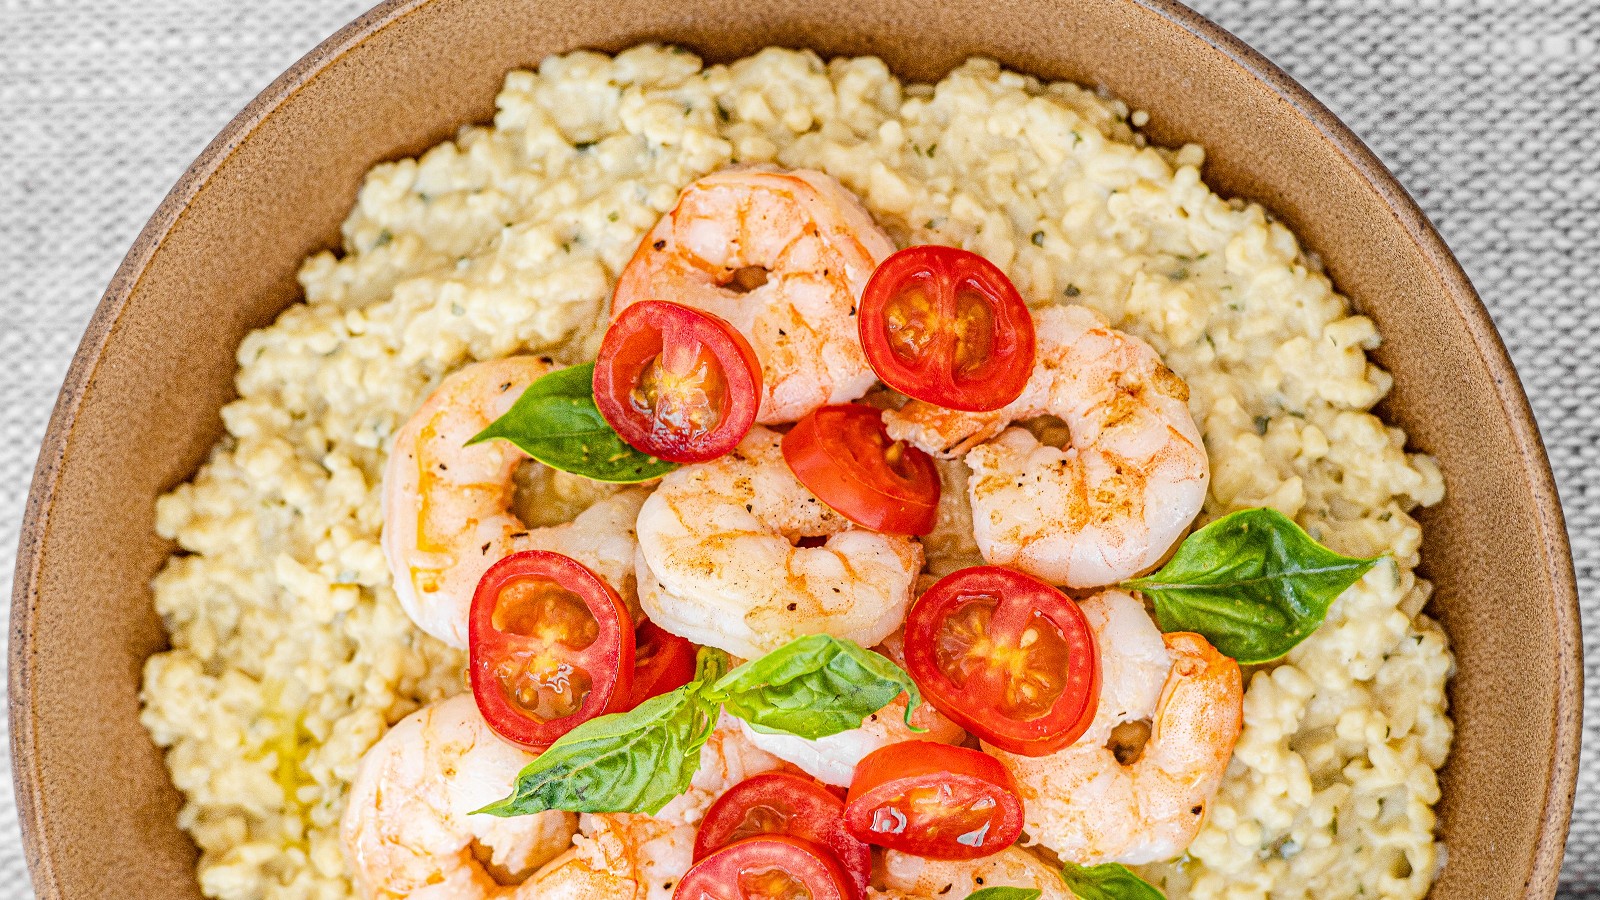 Image of Creamy Parmesan Style RightRice Risotto with Sautéed Shrimp